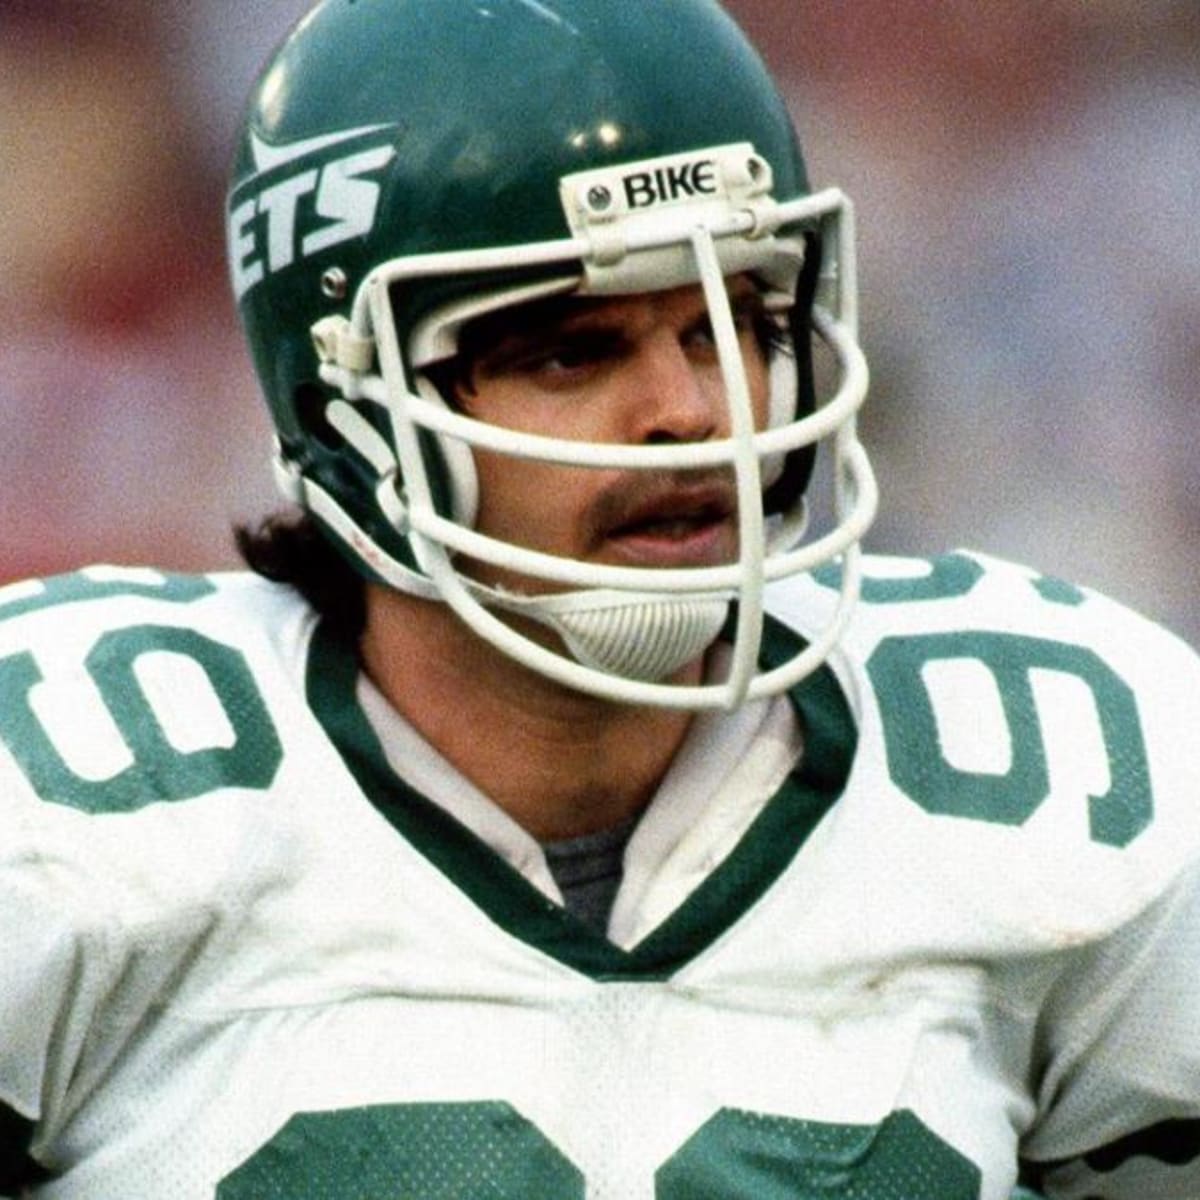 Former Jets great Mark Gastineau reveals battle with several health issues